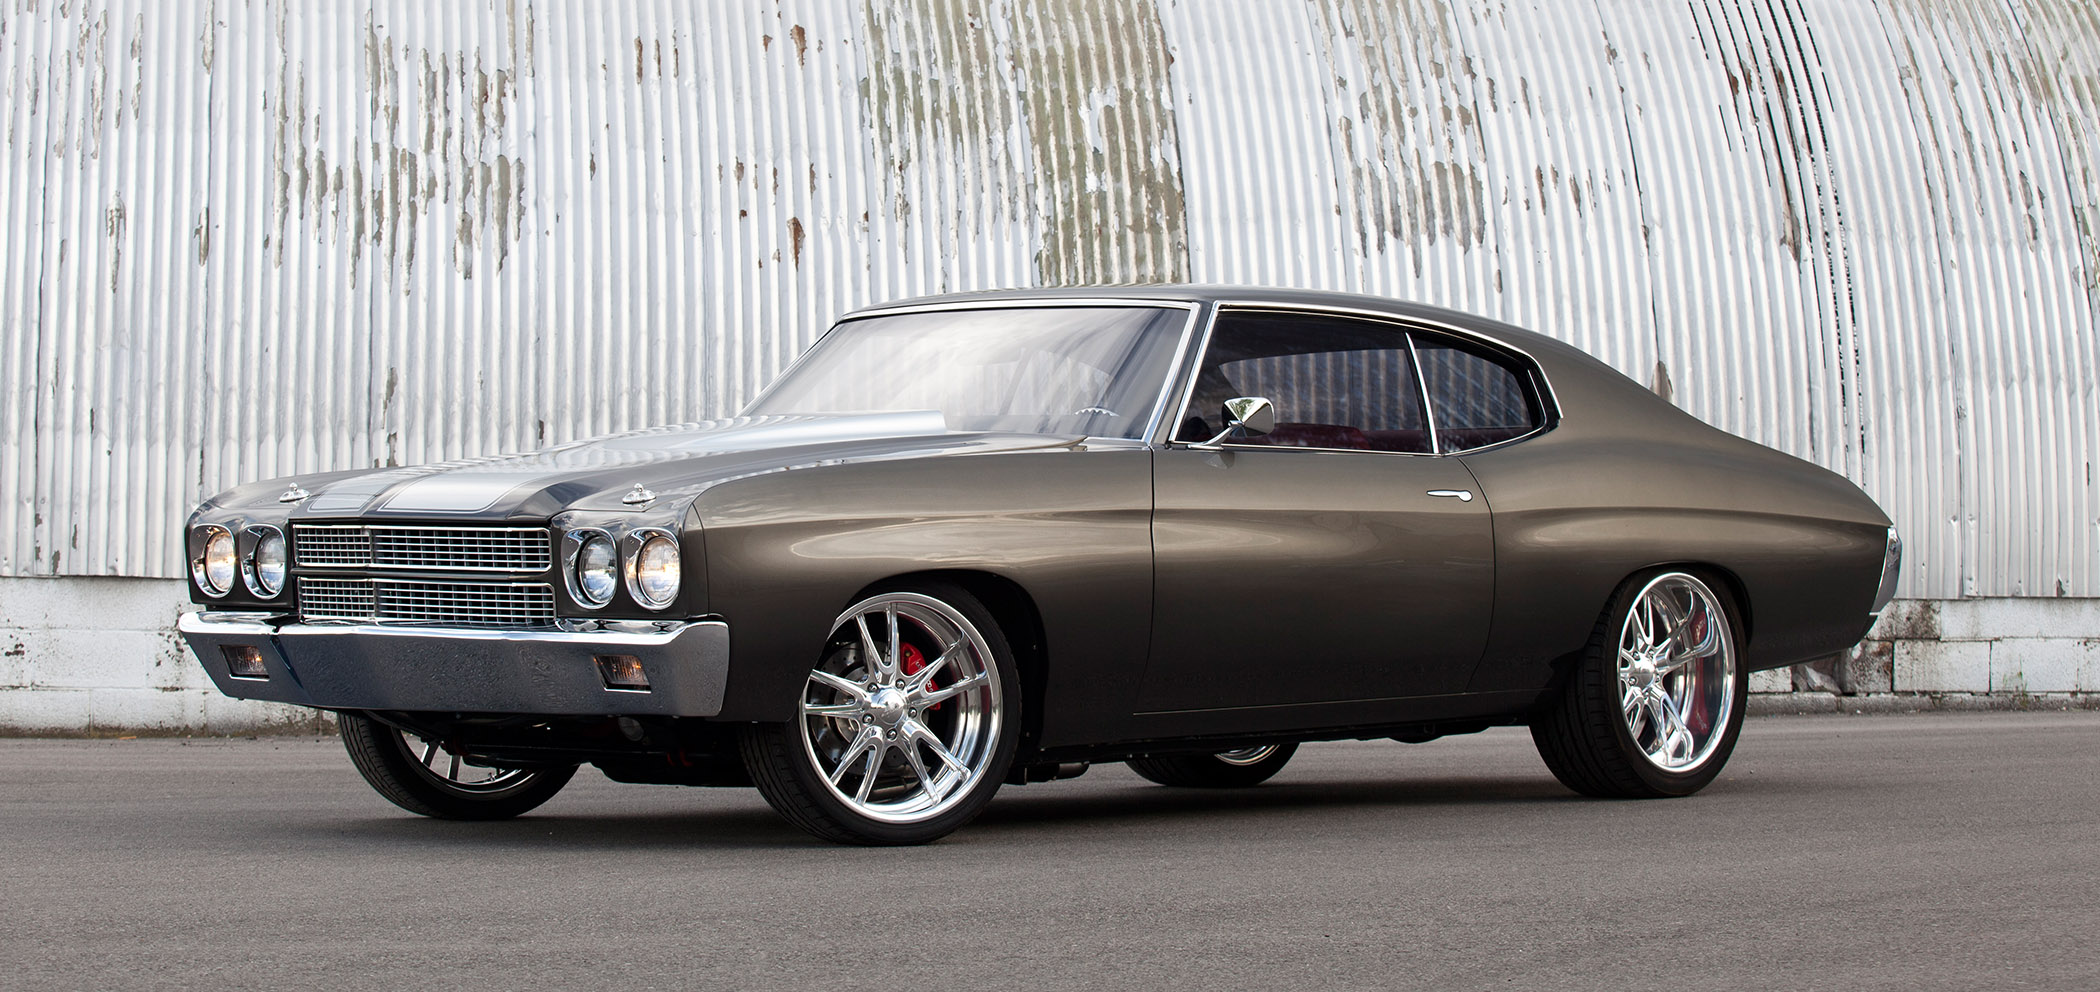 HQ Chevelle Wallpapers | File 531.98Kb